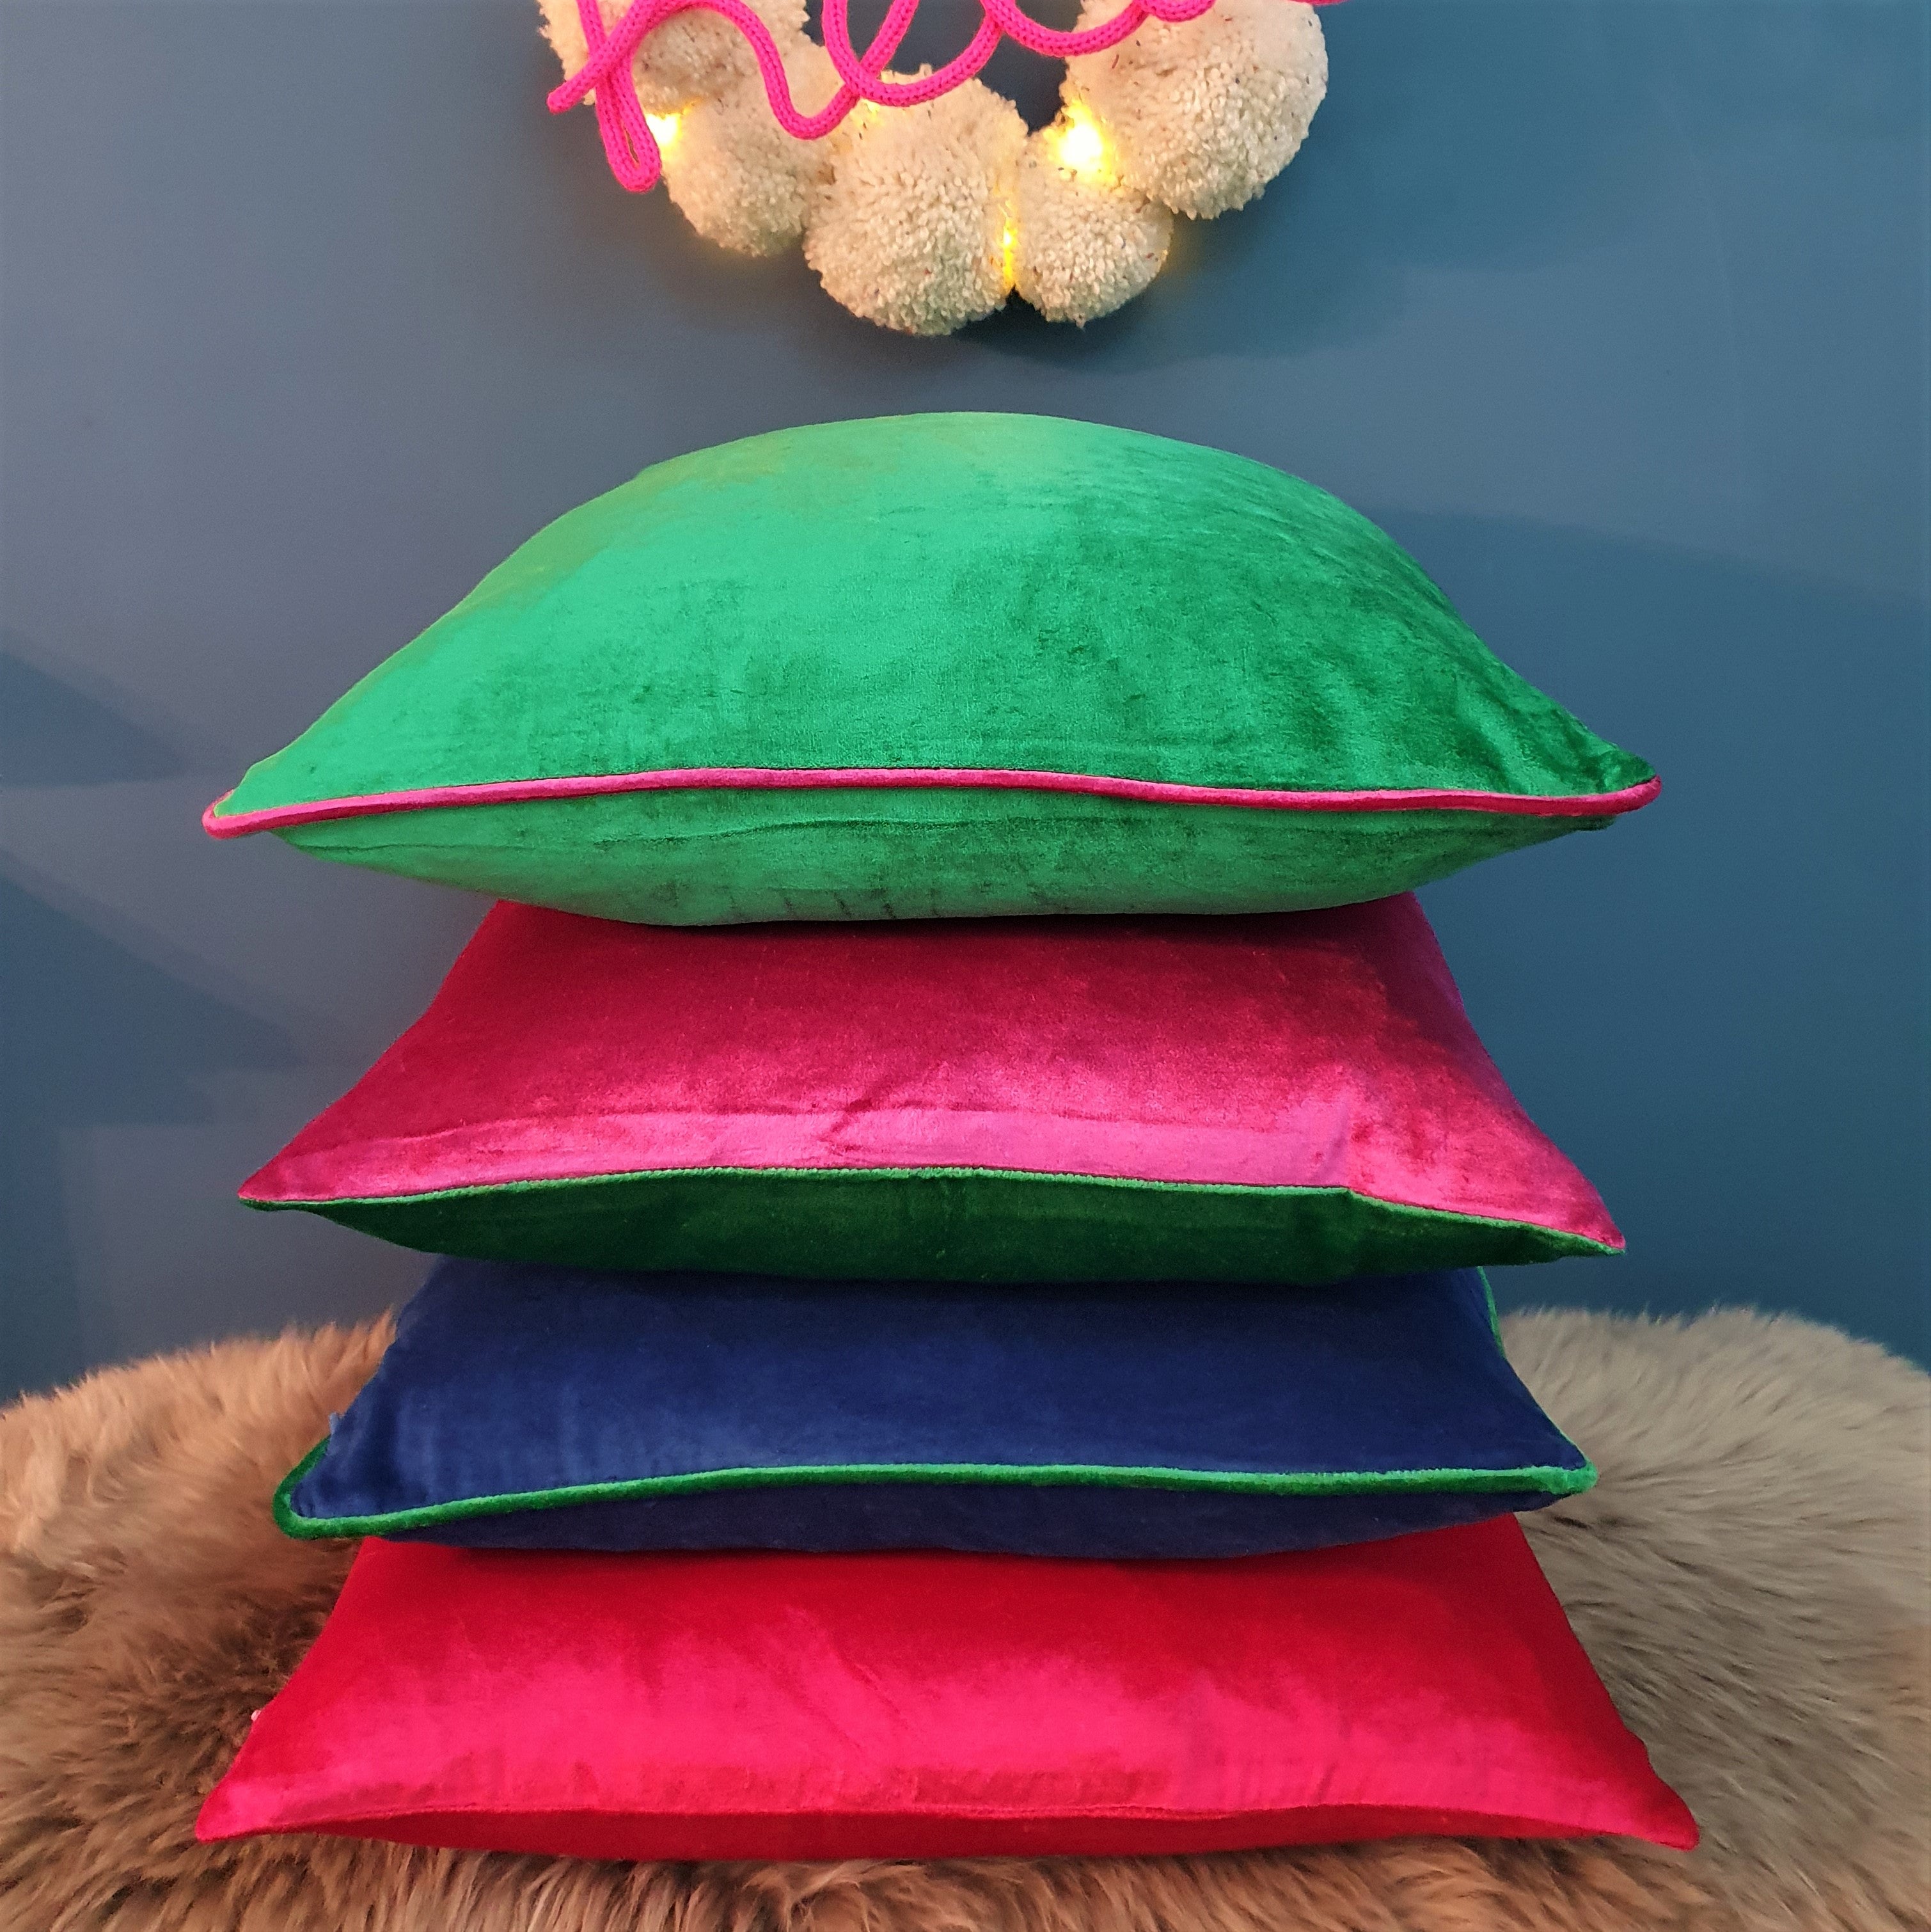 Emerald Green Silky-Smooth Plush Velvet Scatter Cushion with Magenta Piping.